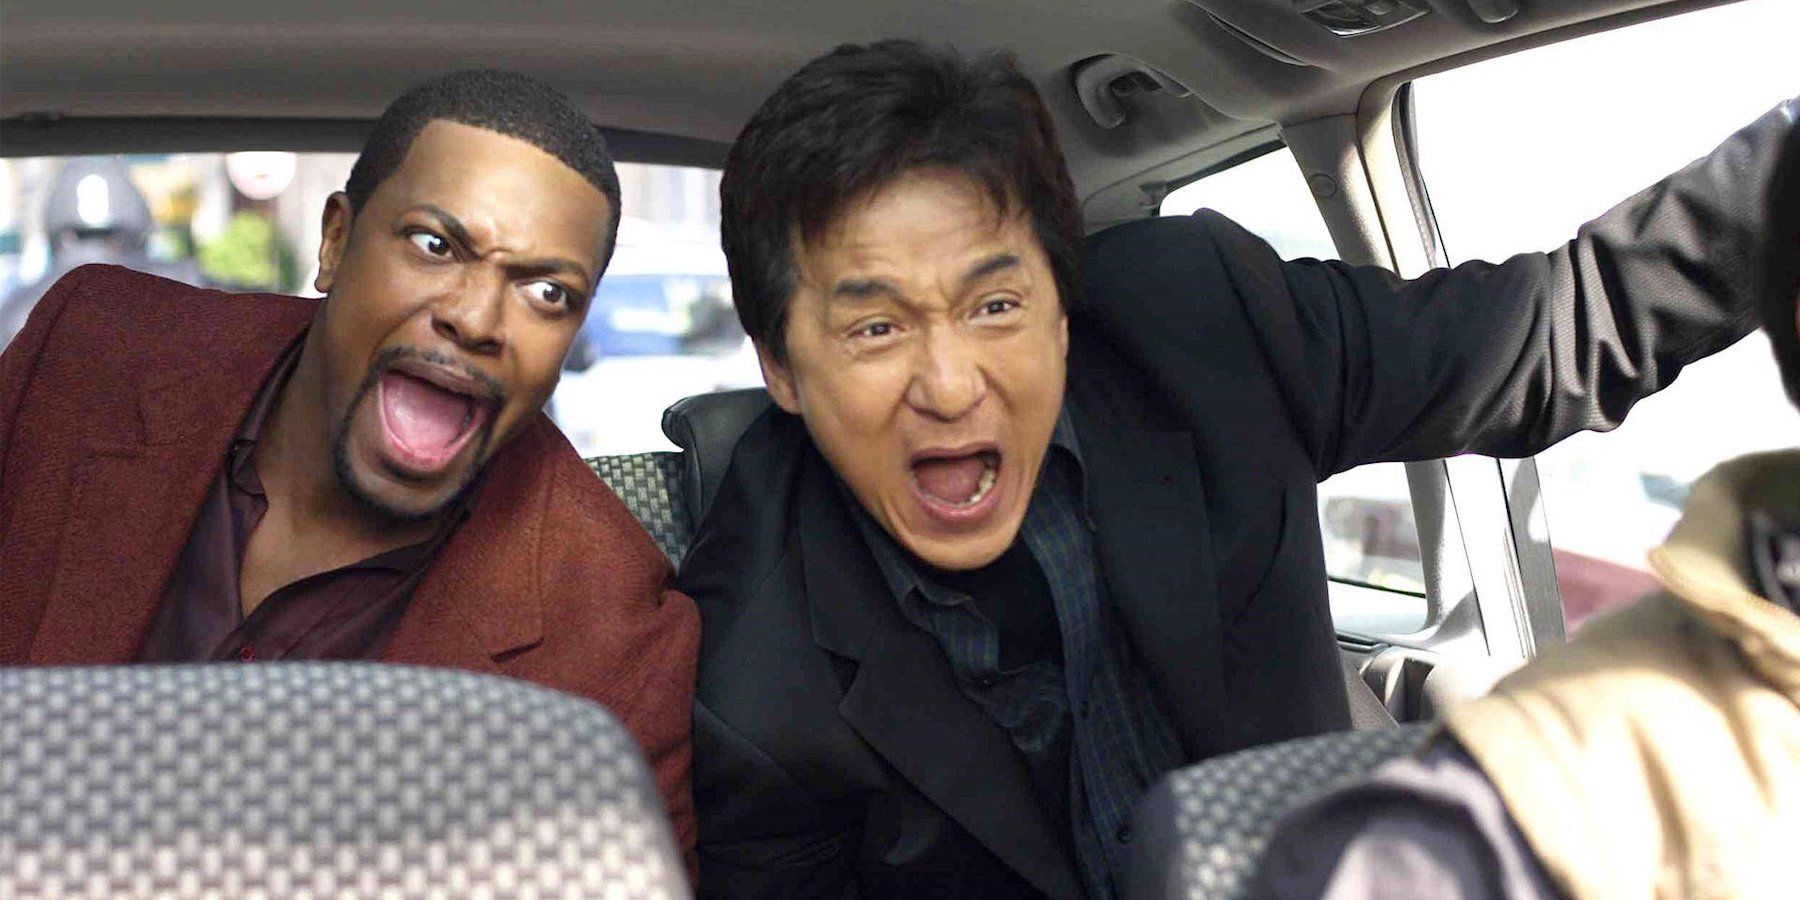 Jackie Chan and Chris Tucker screaming in a taxi in Rush Hour 3